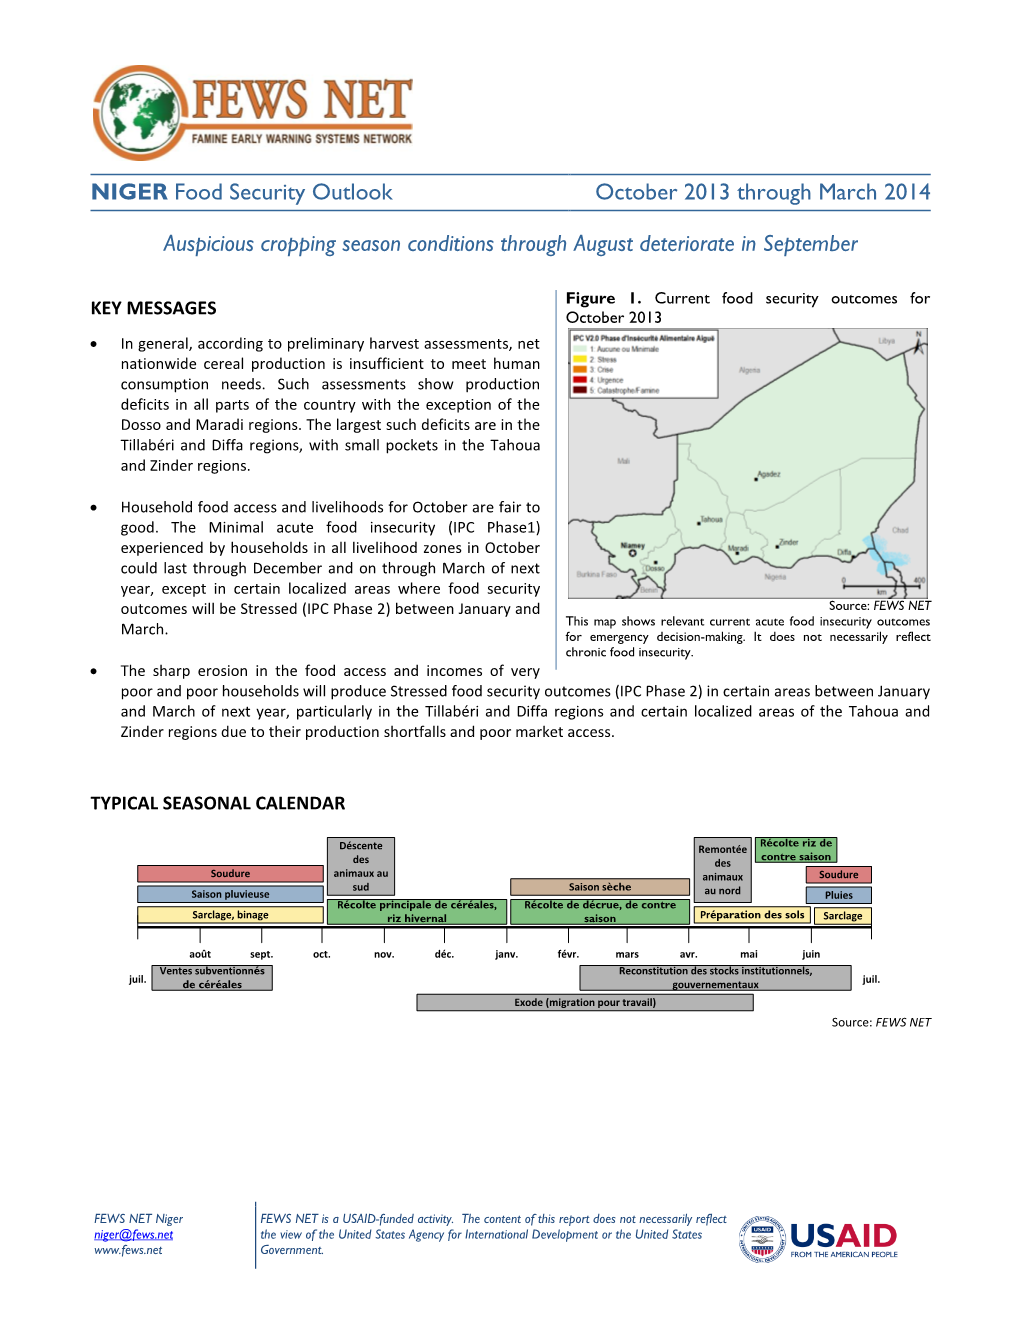 NIGER Food Security Outlook October 2013 Through March 2014